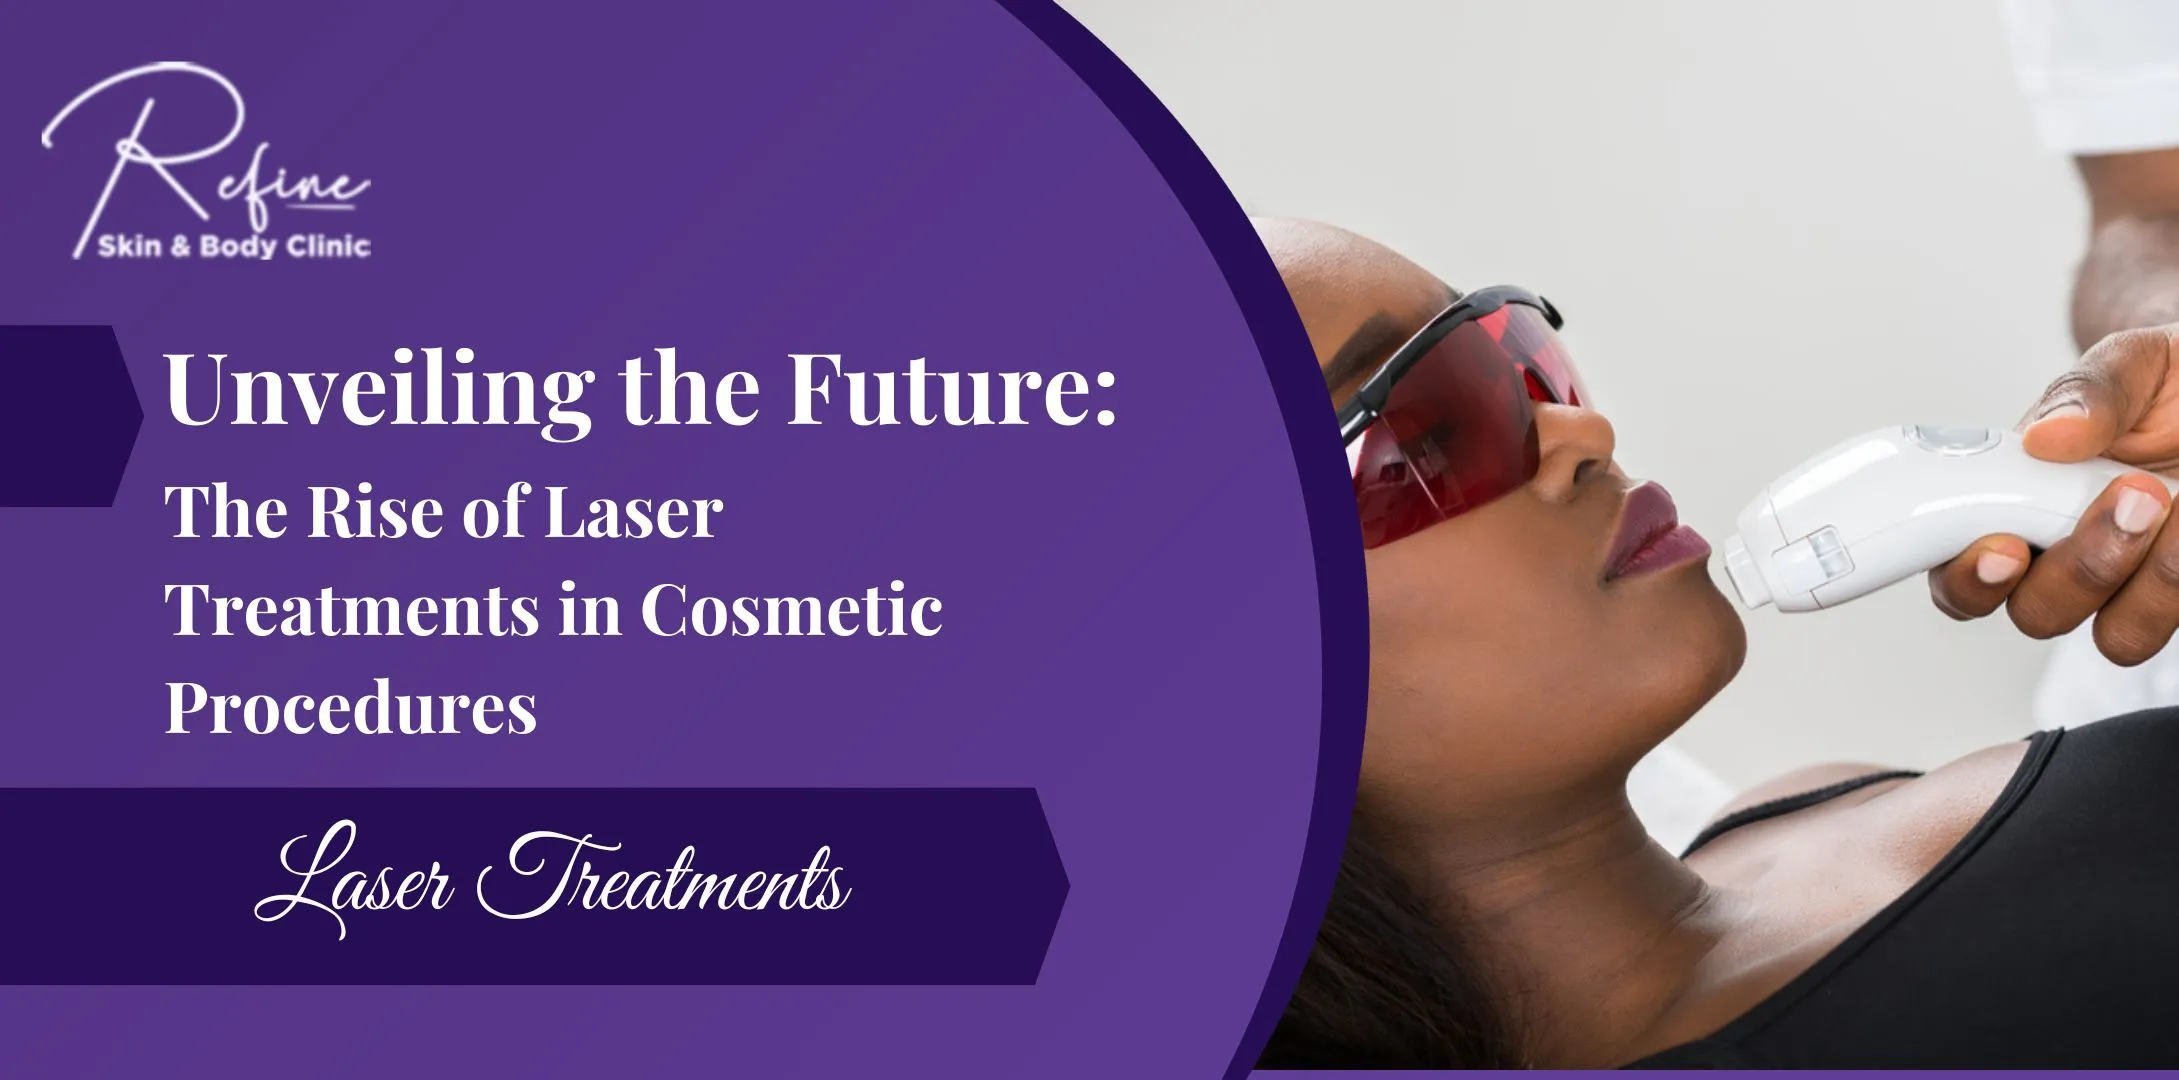 Unveiling the Future: The Rise of Laser Treatments in Cosmetic Procedures